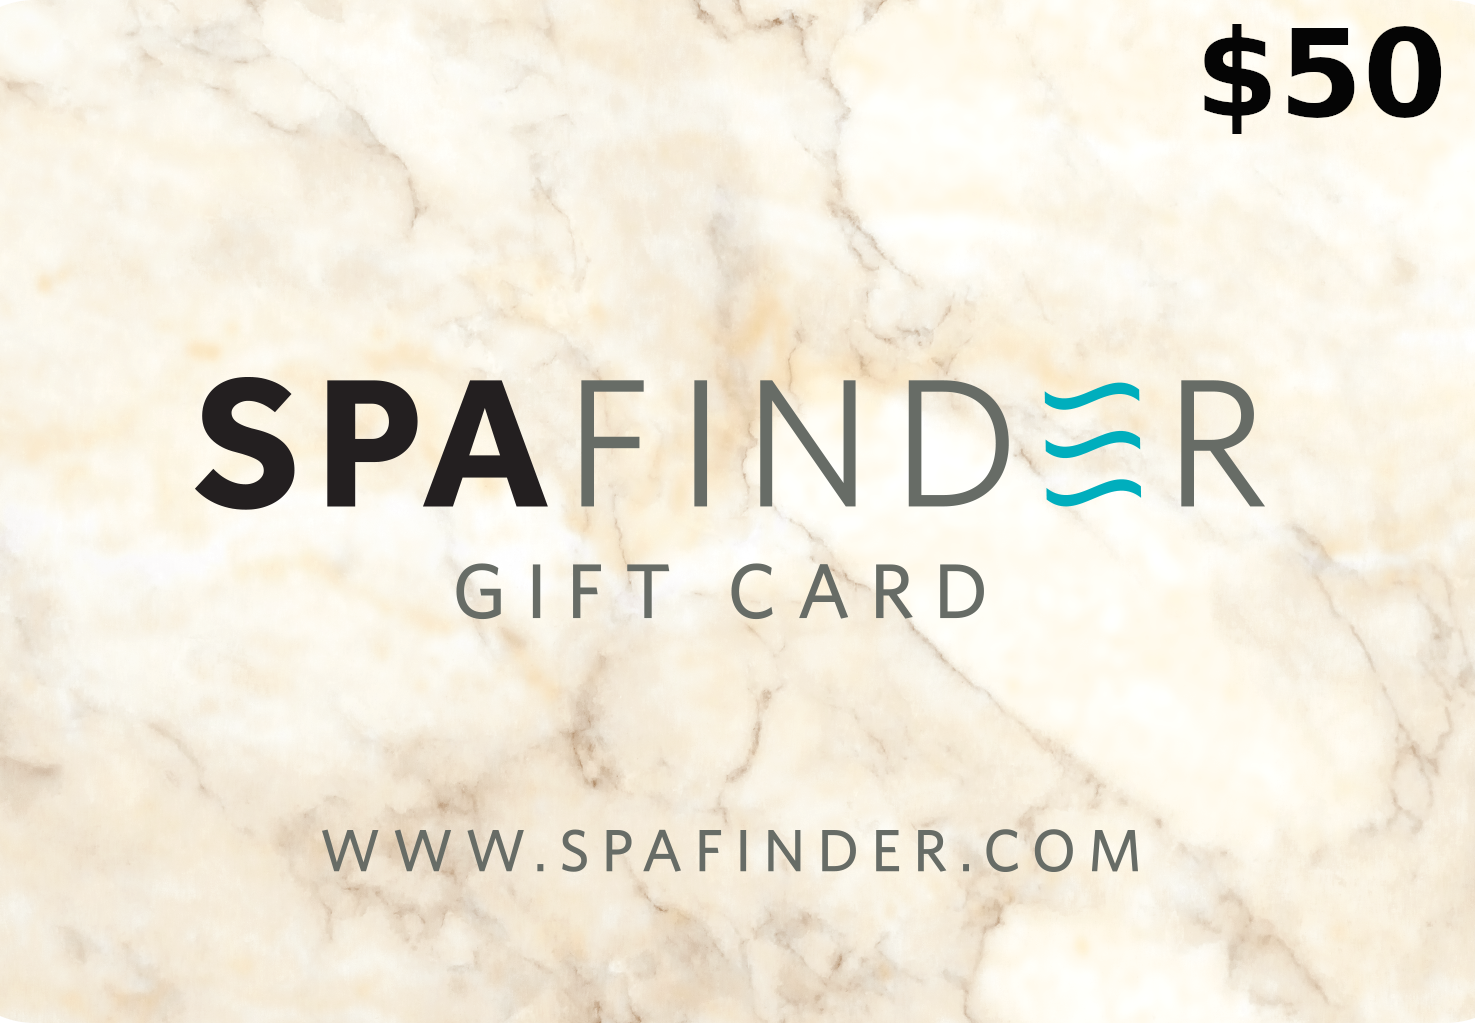 Spafinder Wellness 365 $50 Gift Card US 33.9 usd